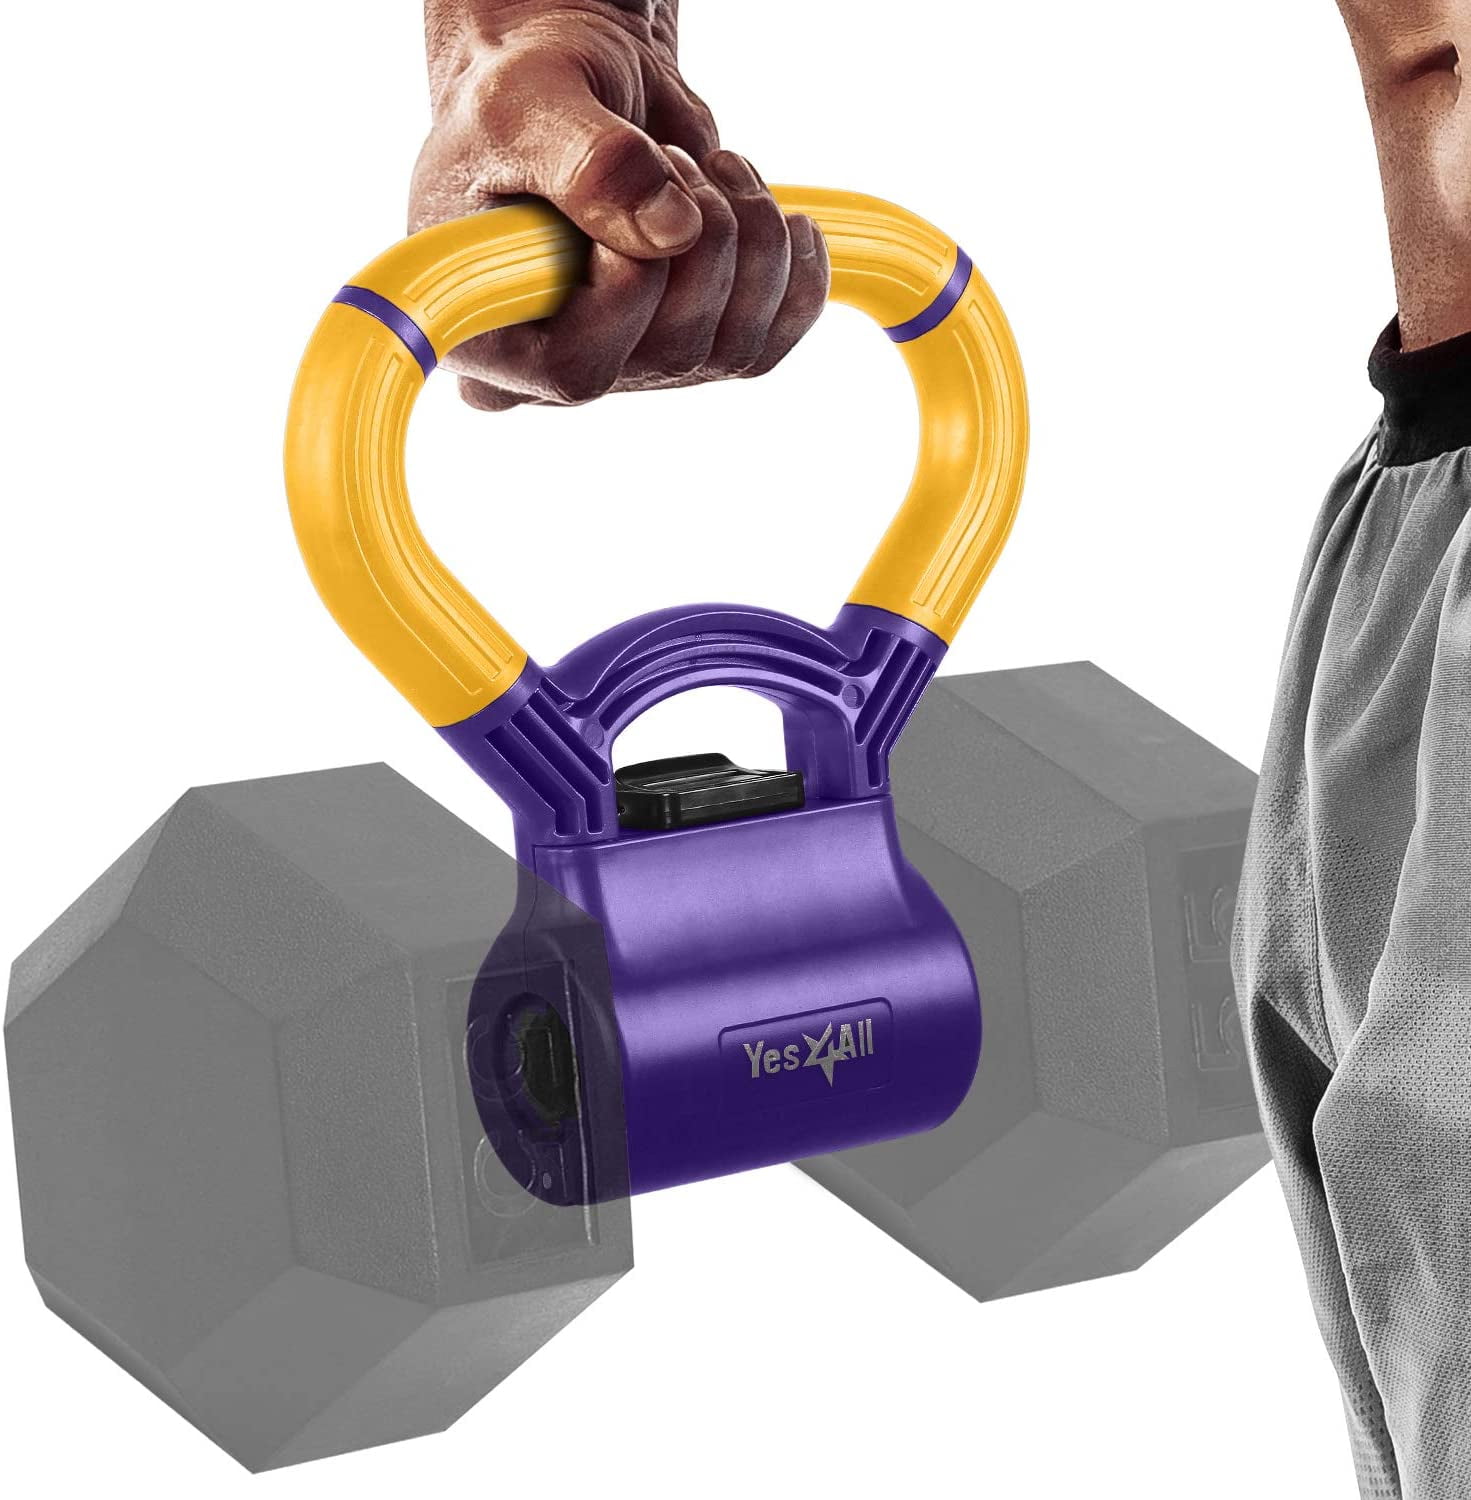 Details about   4KG Durable Kettlebell Weightlifting Dumbbell Grip Strength Workout Fitness Tool 